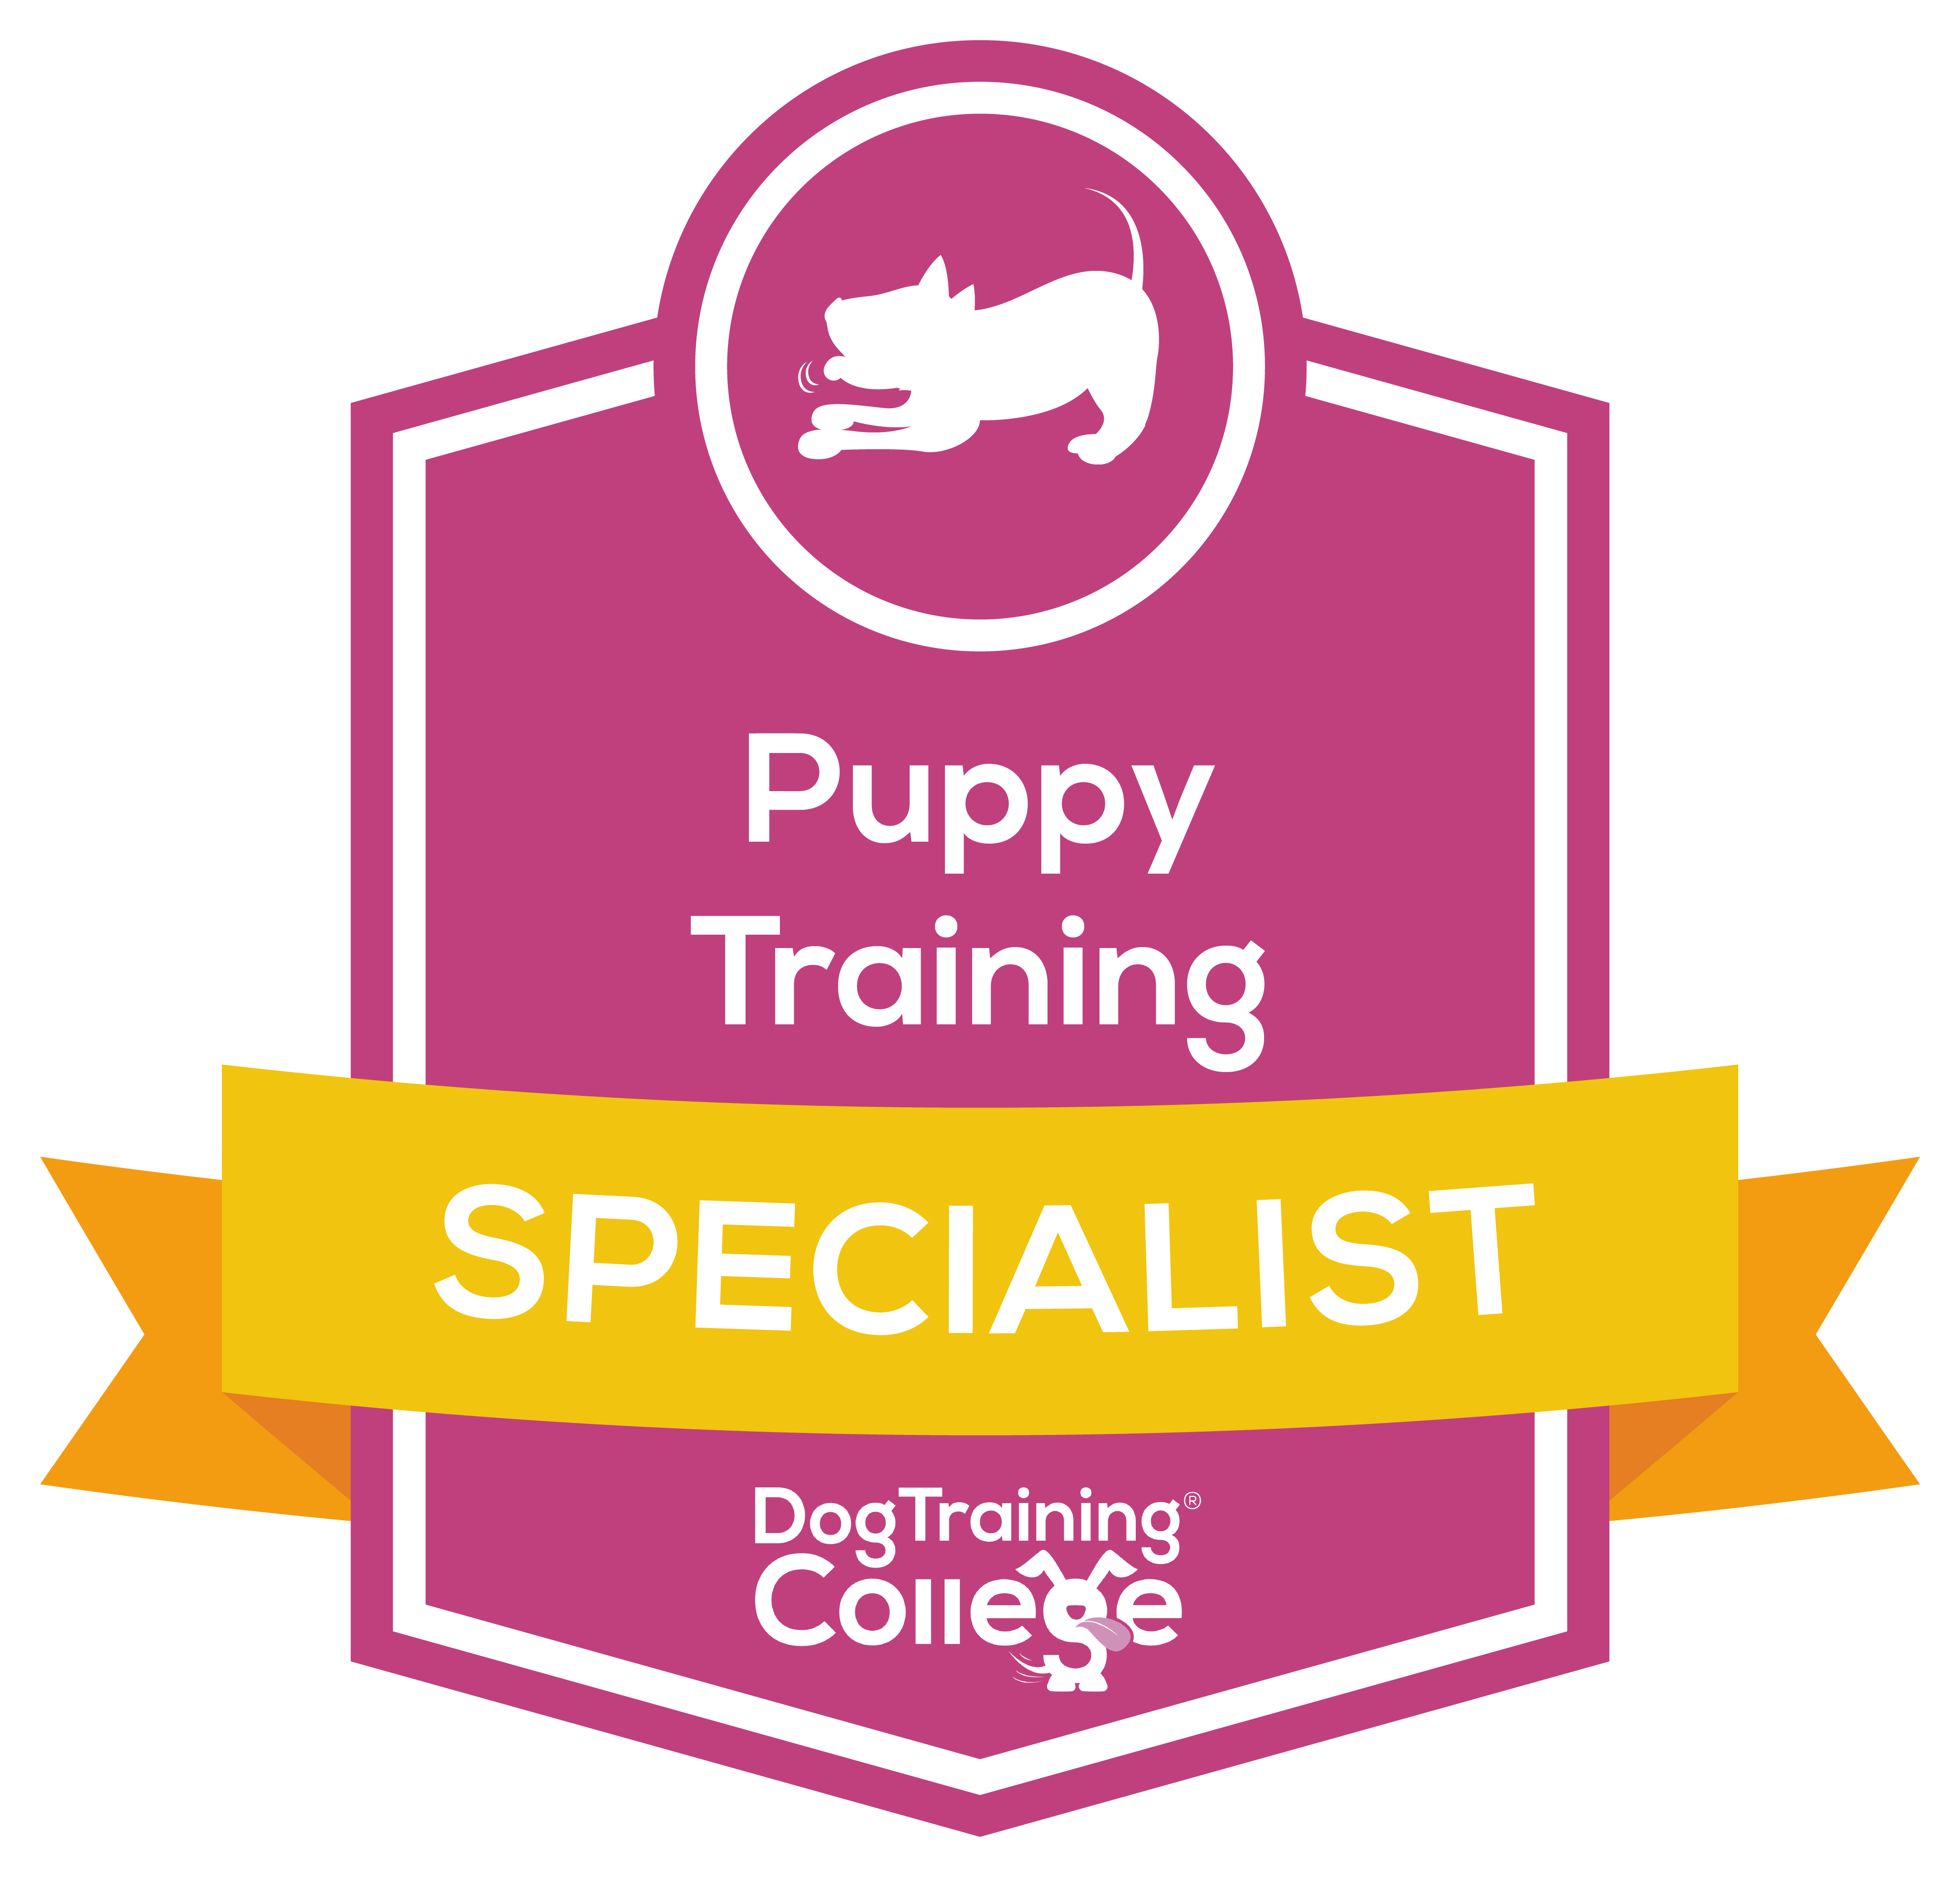 0041093936193-wps-puppy-training-specialist-badge-large.png